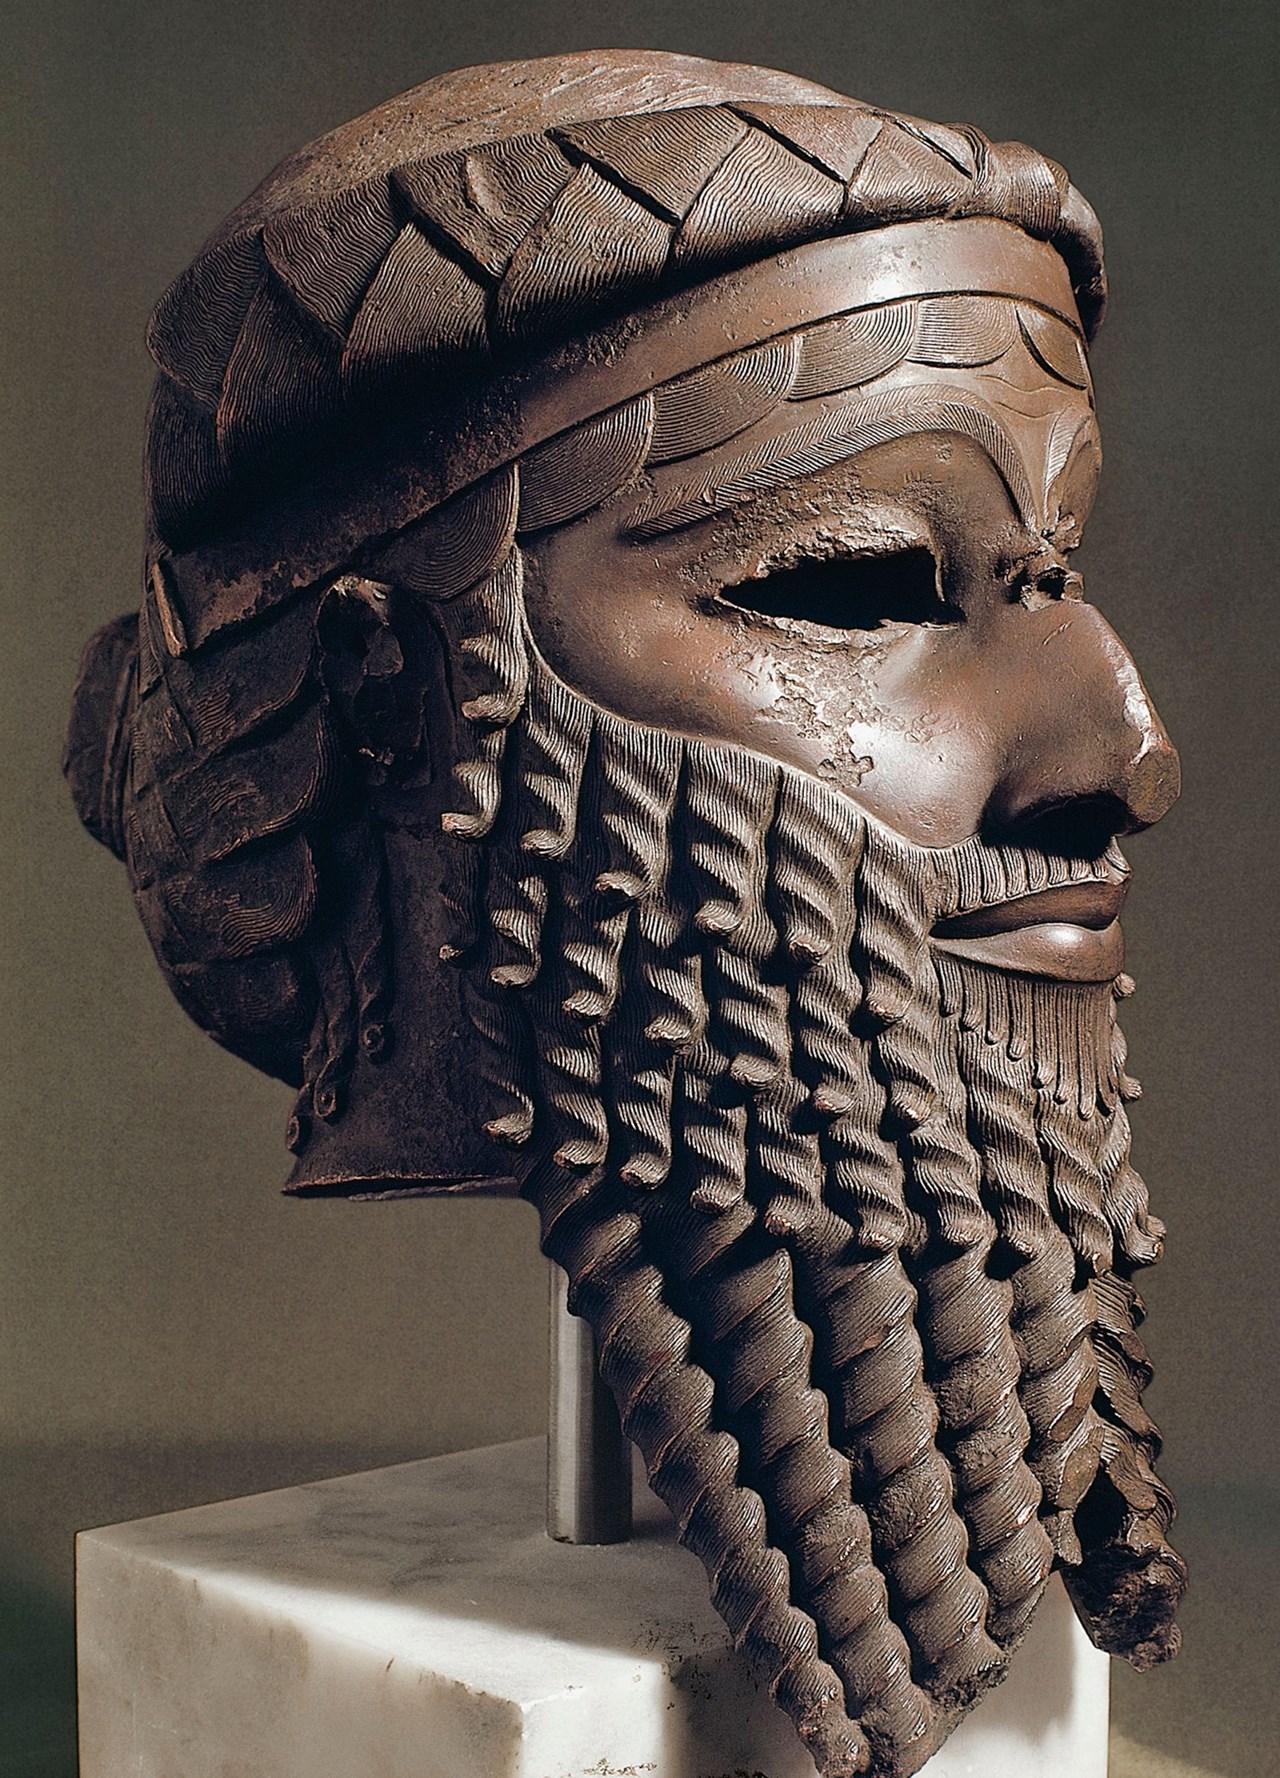 Founder of the world’s first empire, Sargon of Akkad upheld order and justice. PHOTOGRAPH BY DEA PICTURE LIBRARY, DE AGOSTINI/GETTY https://www.nationalgeographic.com/culture/article/king-sargon-akkad